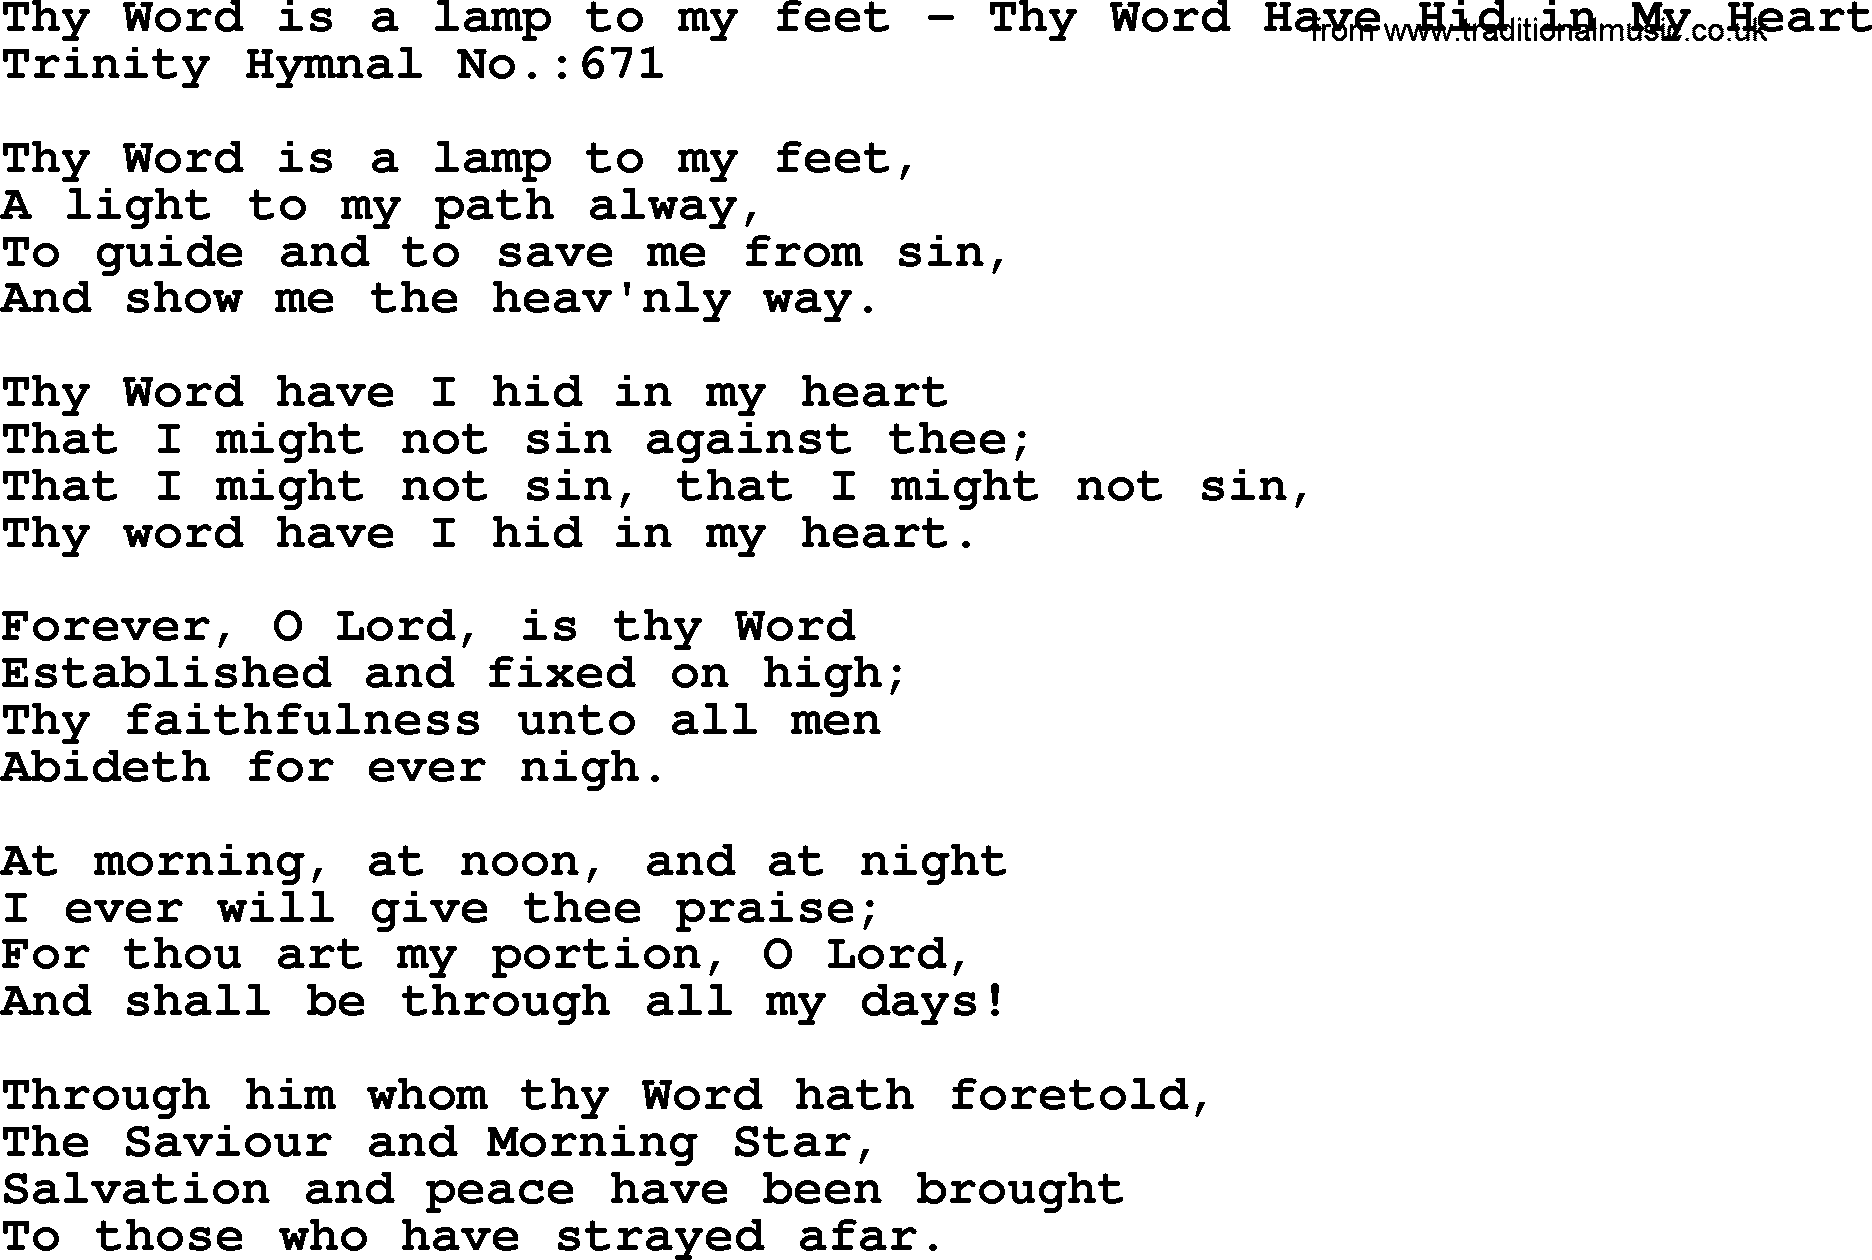 Trinity Hymnal Hymn: Thy Word Is A Lamp To My Feet--Thy Word Have Hid In My Heart, lyrics with midi music